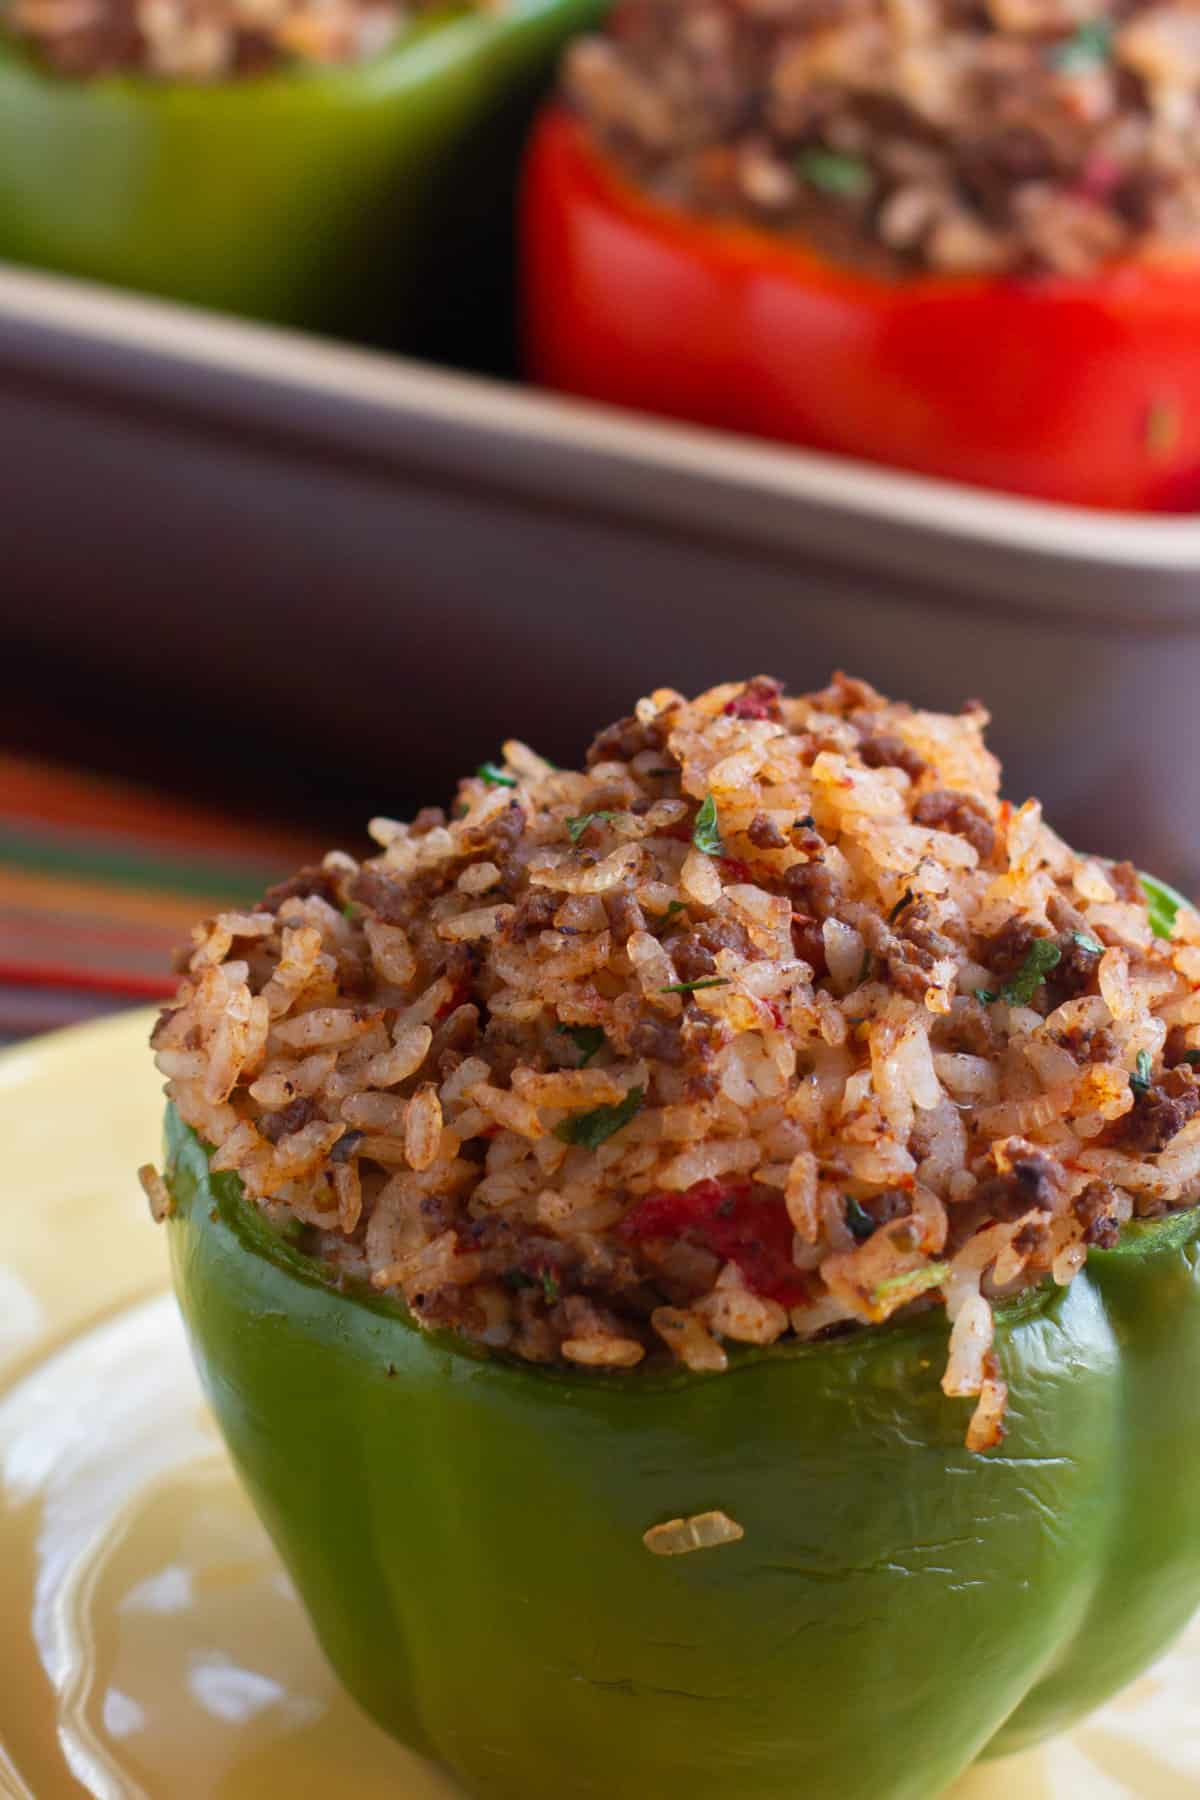 A baked green pepper on a plate filled with rice and ground beef.